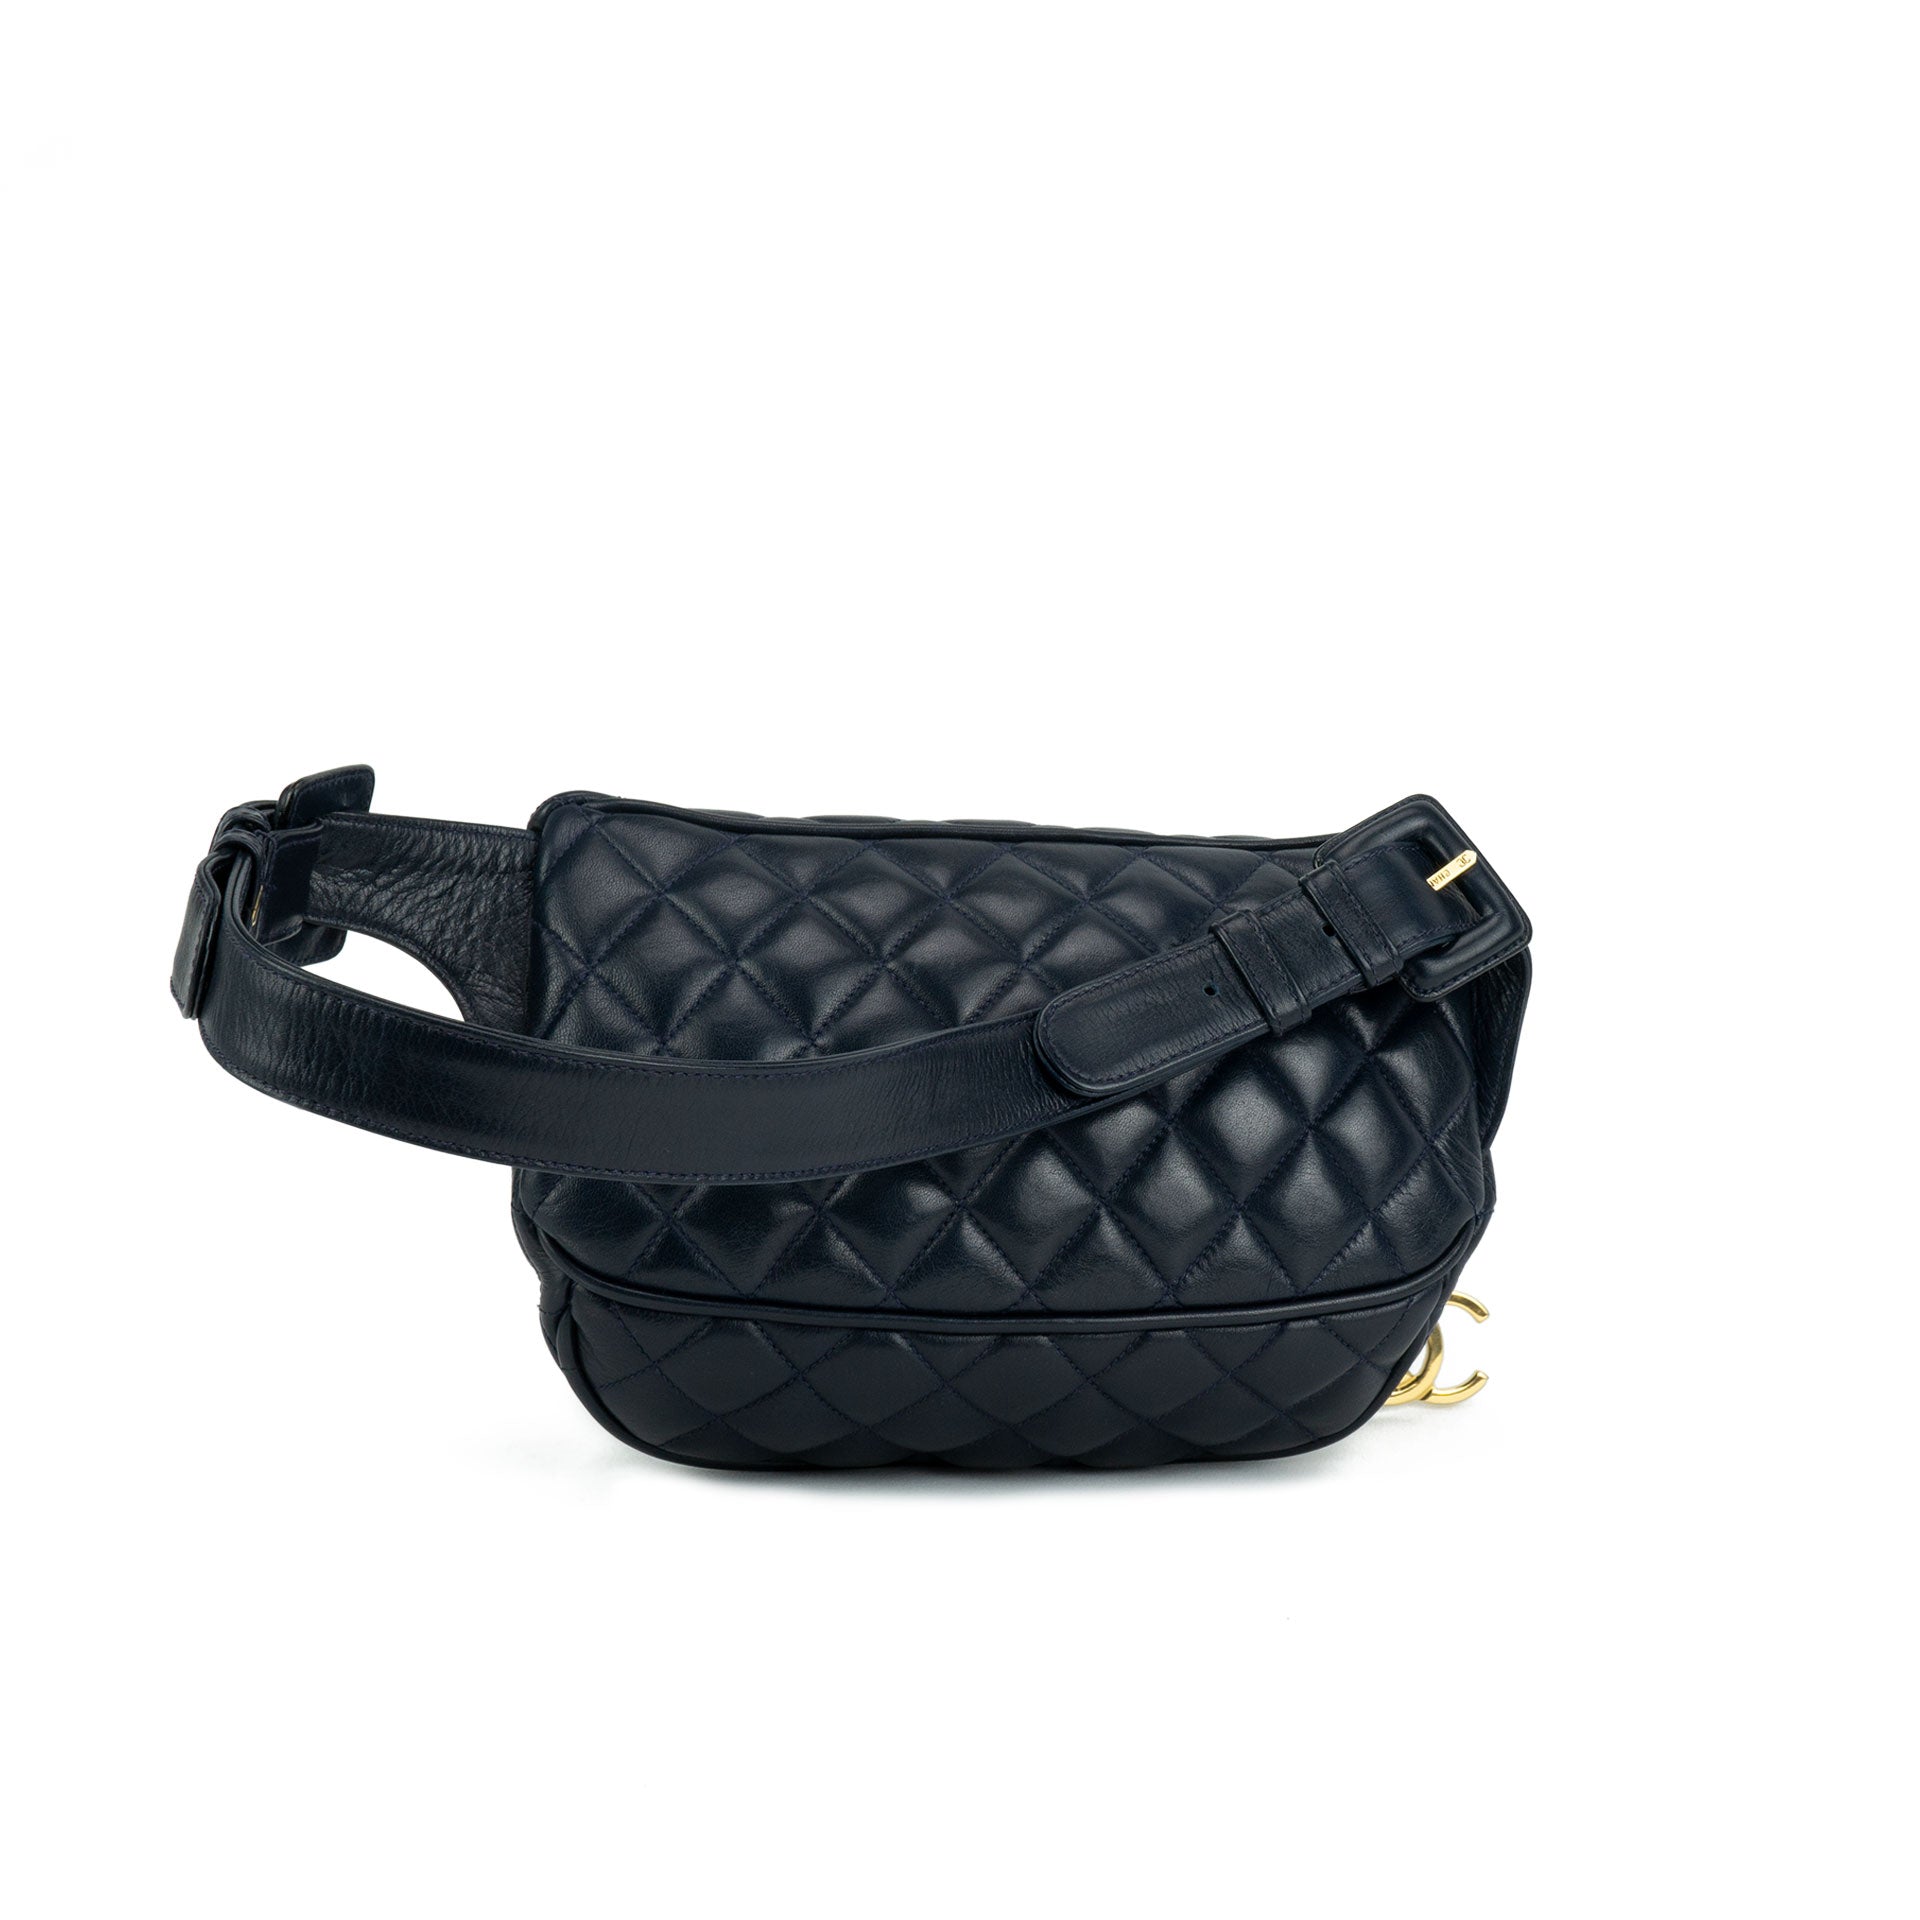 Chanel Vintage Lambskin Quilted Fanny Pack